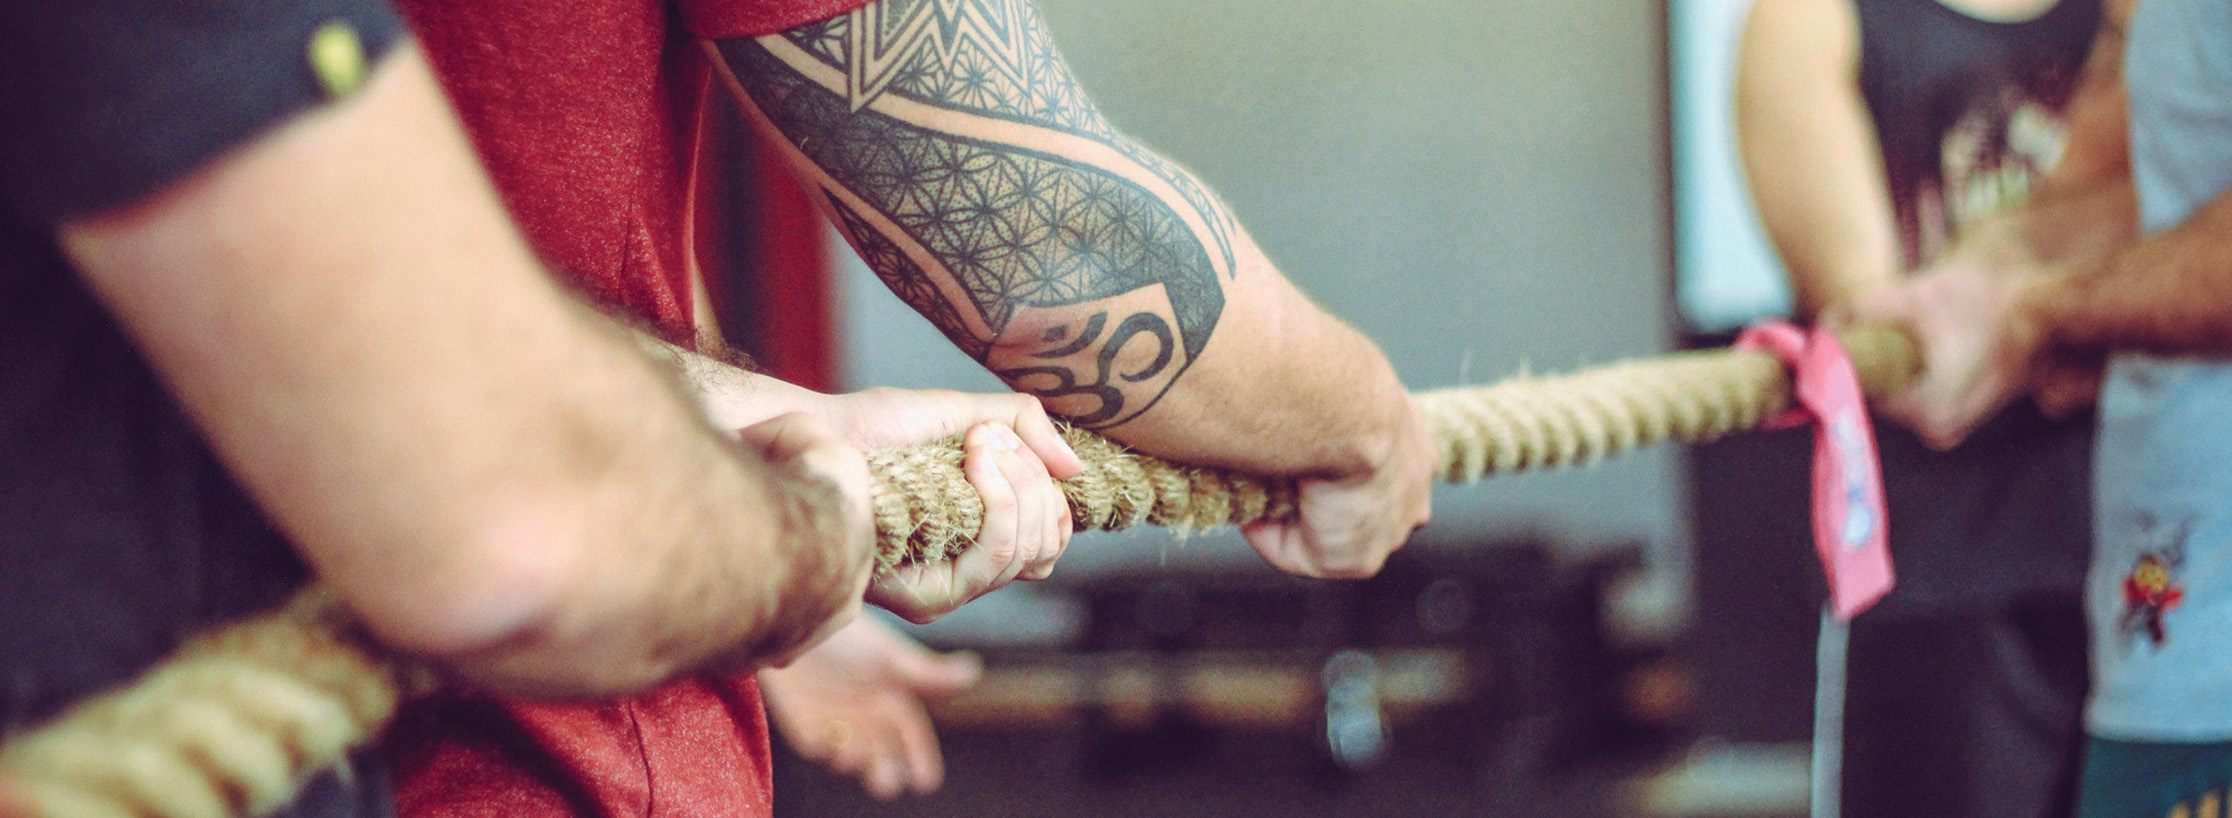 Push vs. Pull: The Ongoing Marketing Tug-of-War